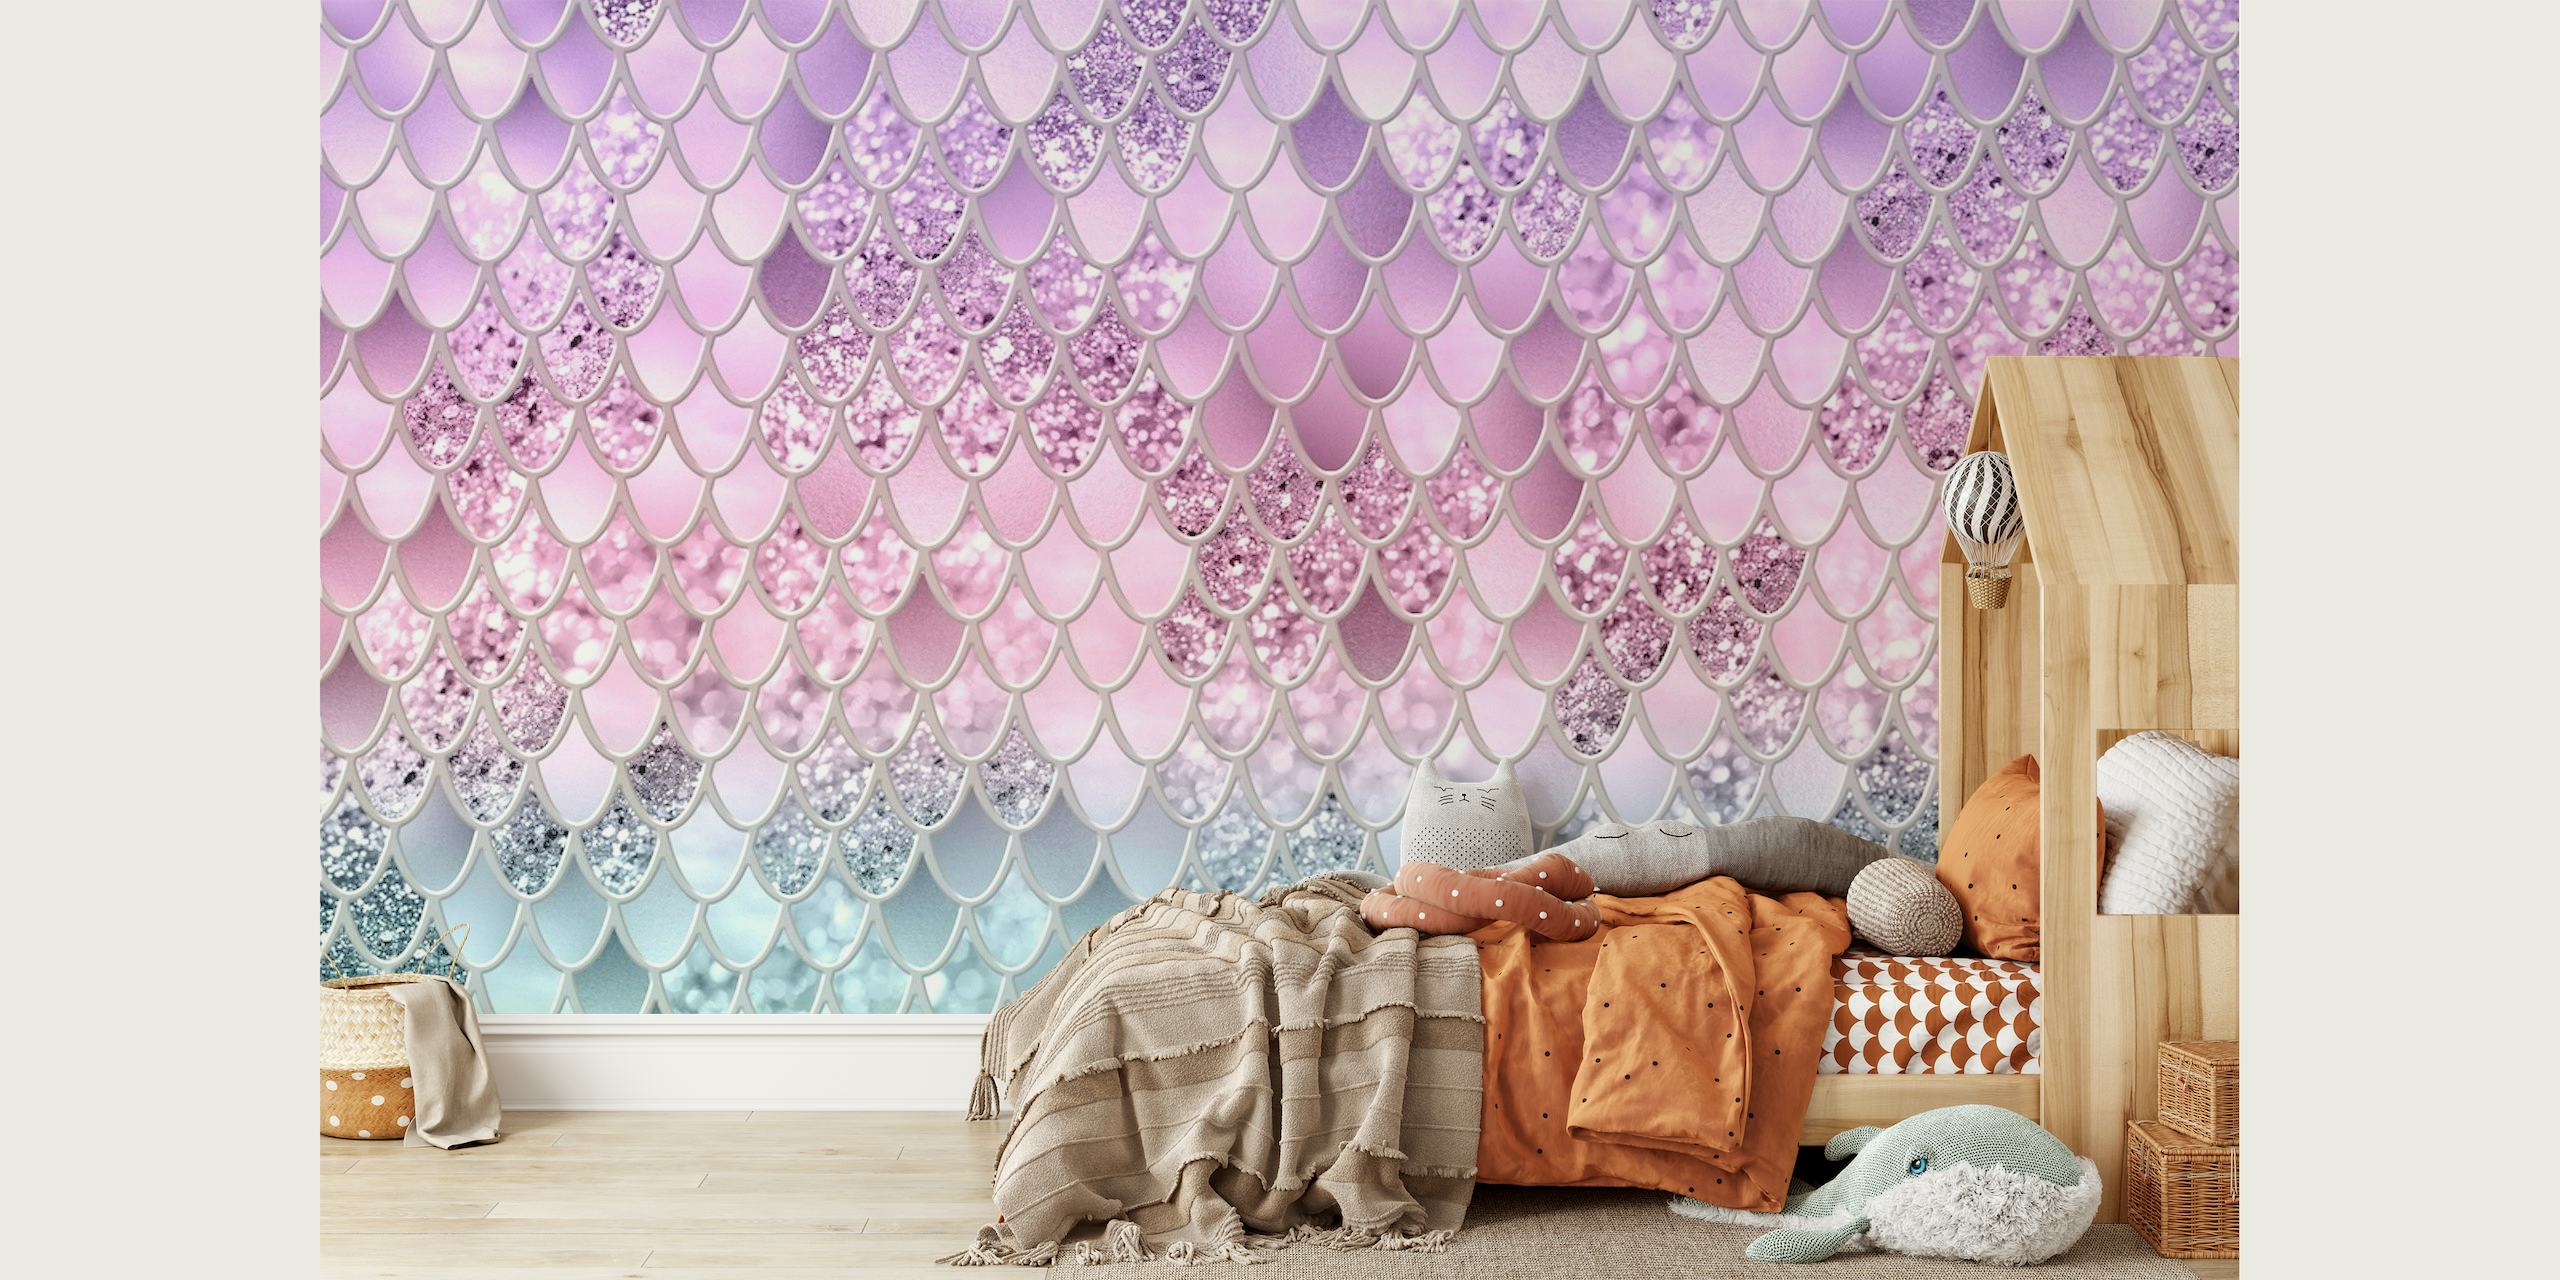 Pastel mermaid scale pattern wall mural with glittery appearance, transitioning from purple to blue.